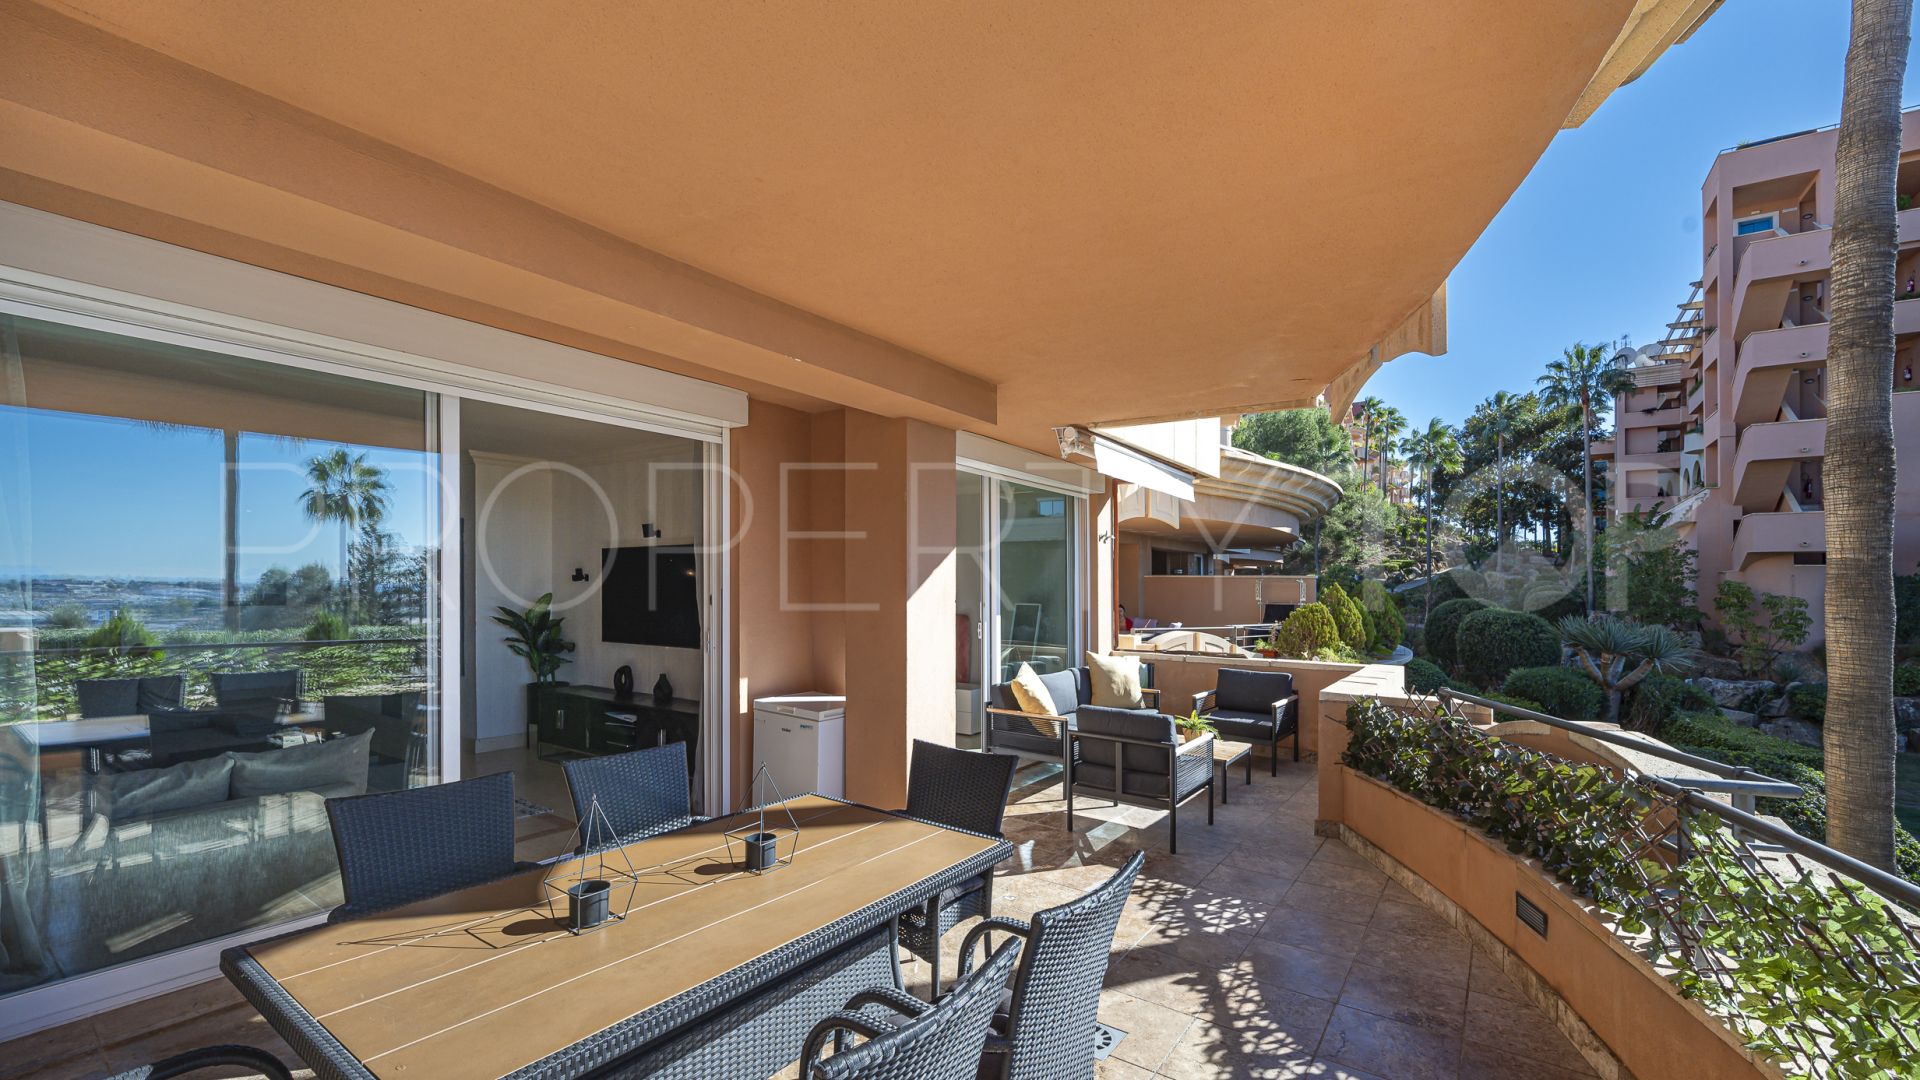 2 bedrooms Magna Marbella apartment for sale